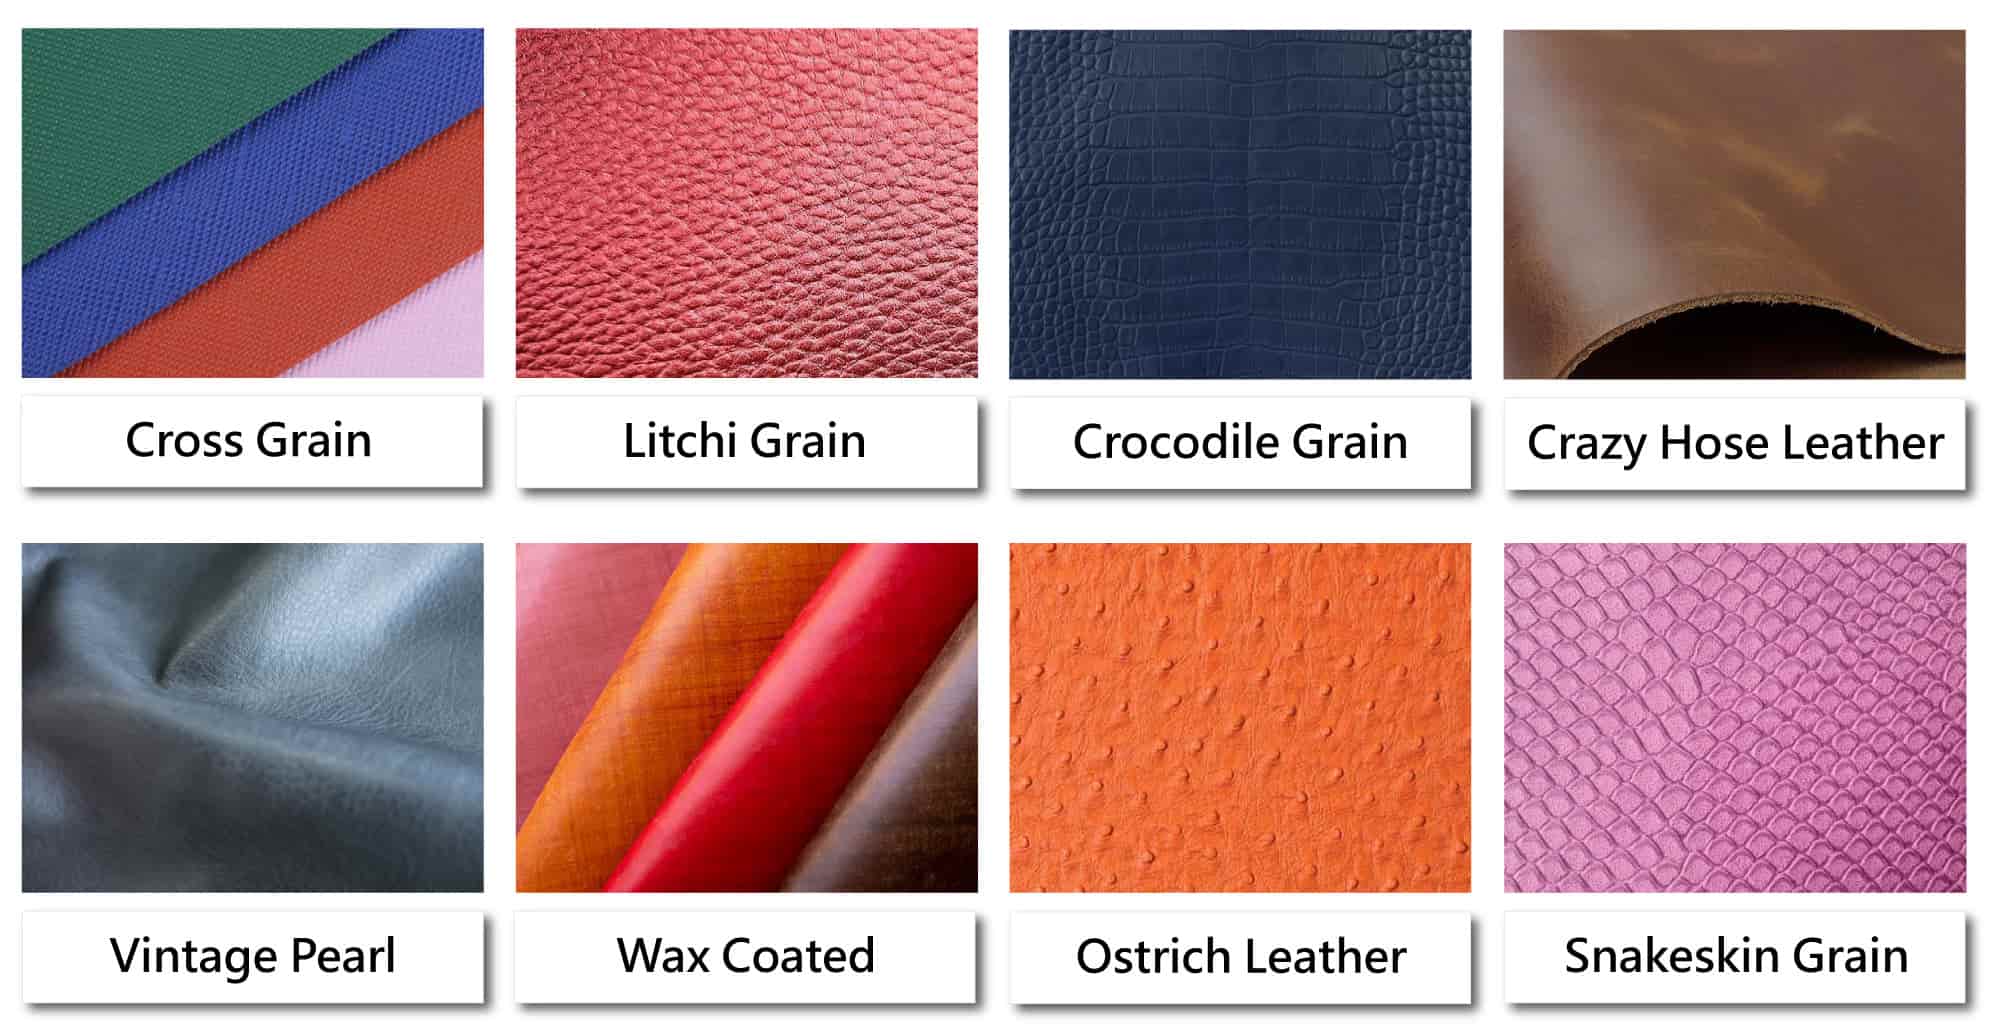  We have many leather materials for your options.